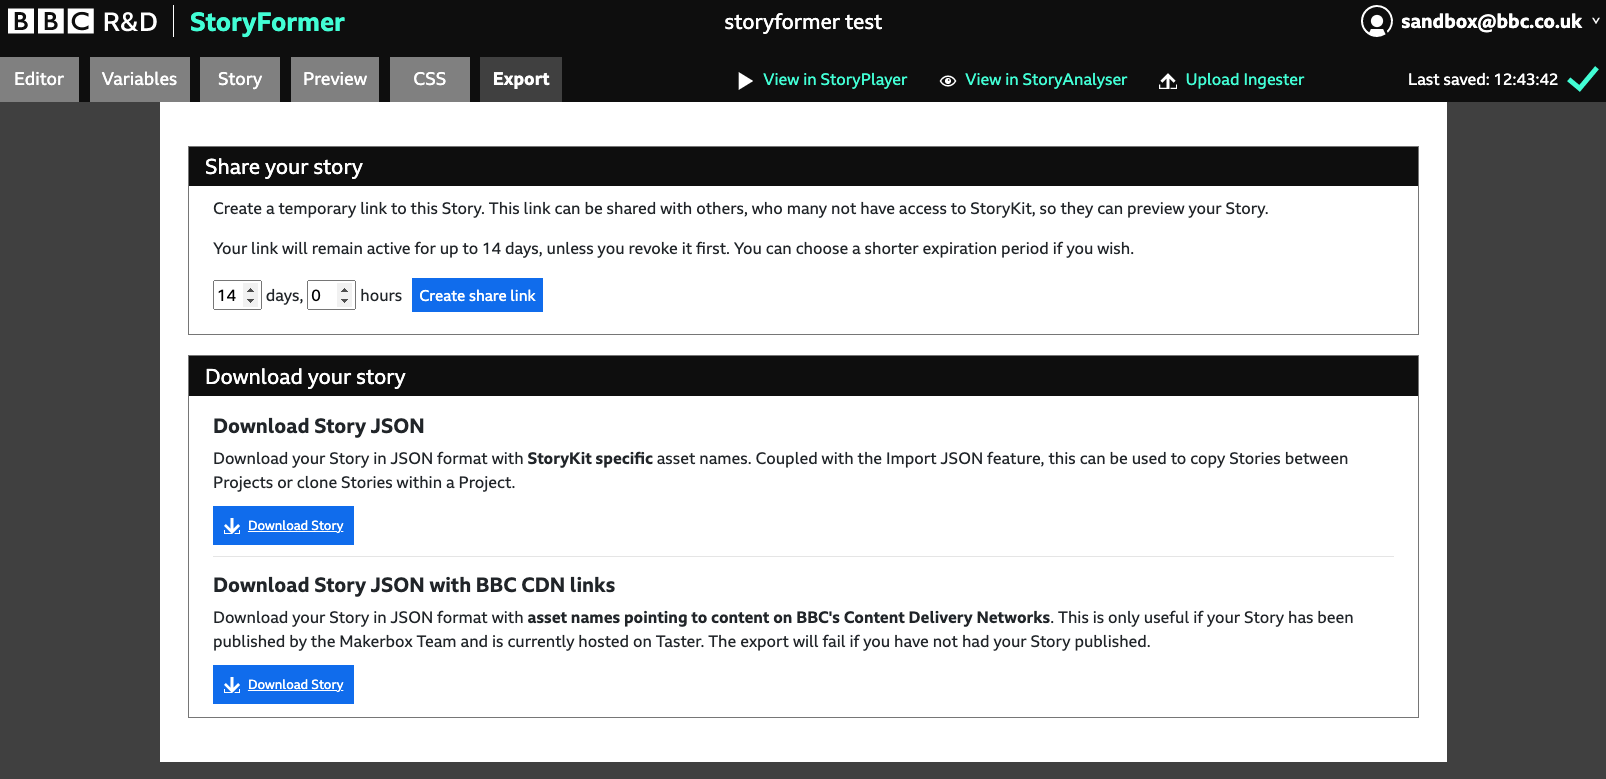 Options for exporting your Story for playback inside Storyformer